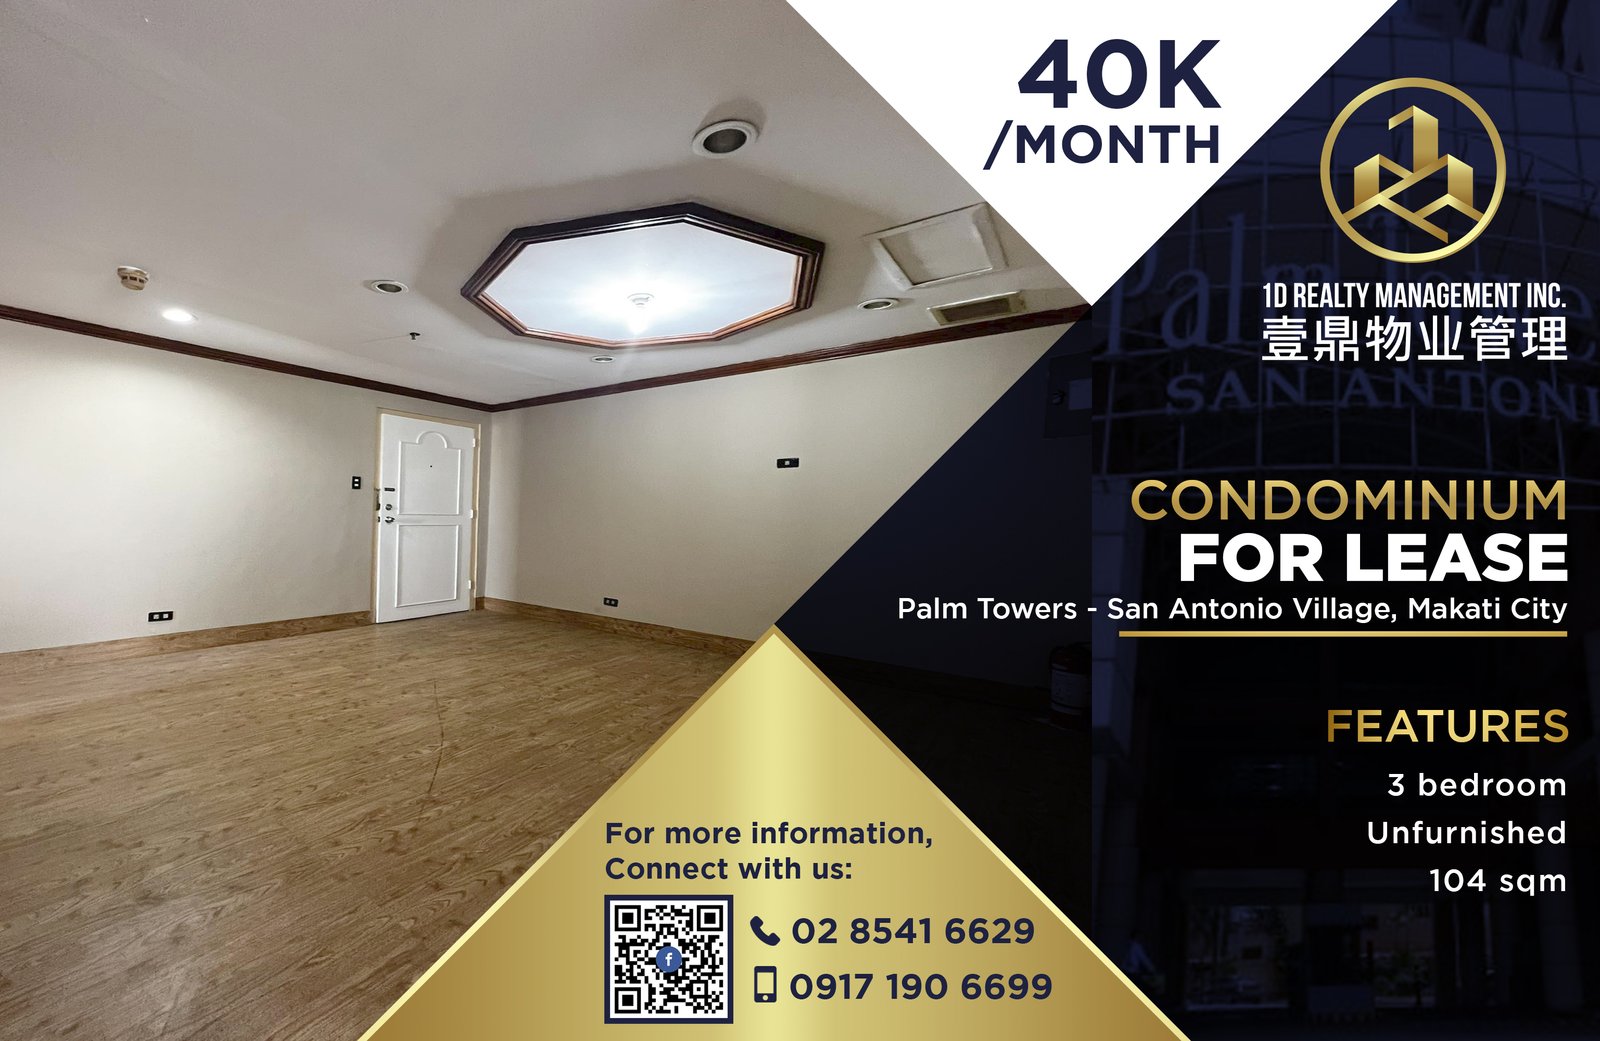 FOR LEASE - 3BR - PALM TOWER - SAN ANTONIO VILLAGE MAKATI CITY